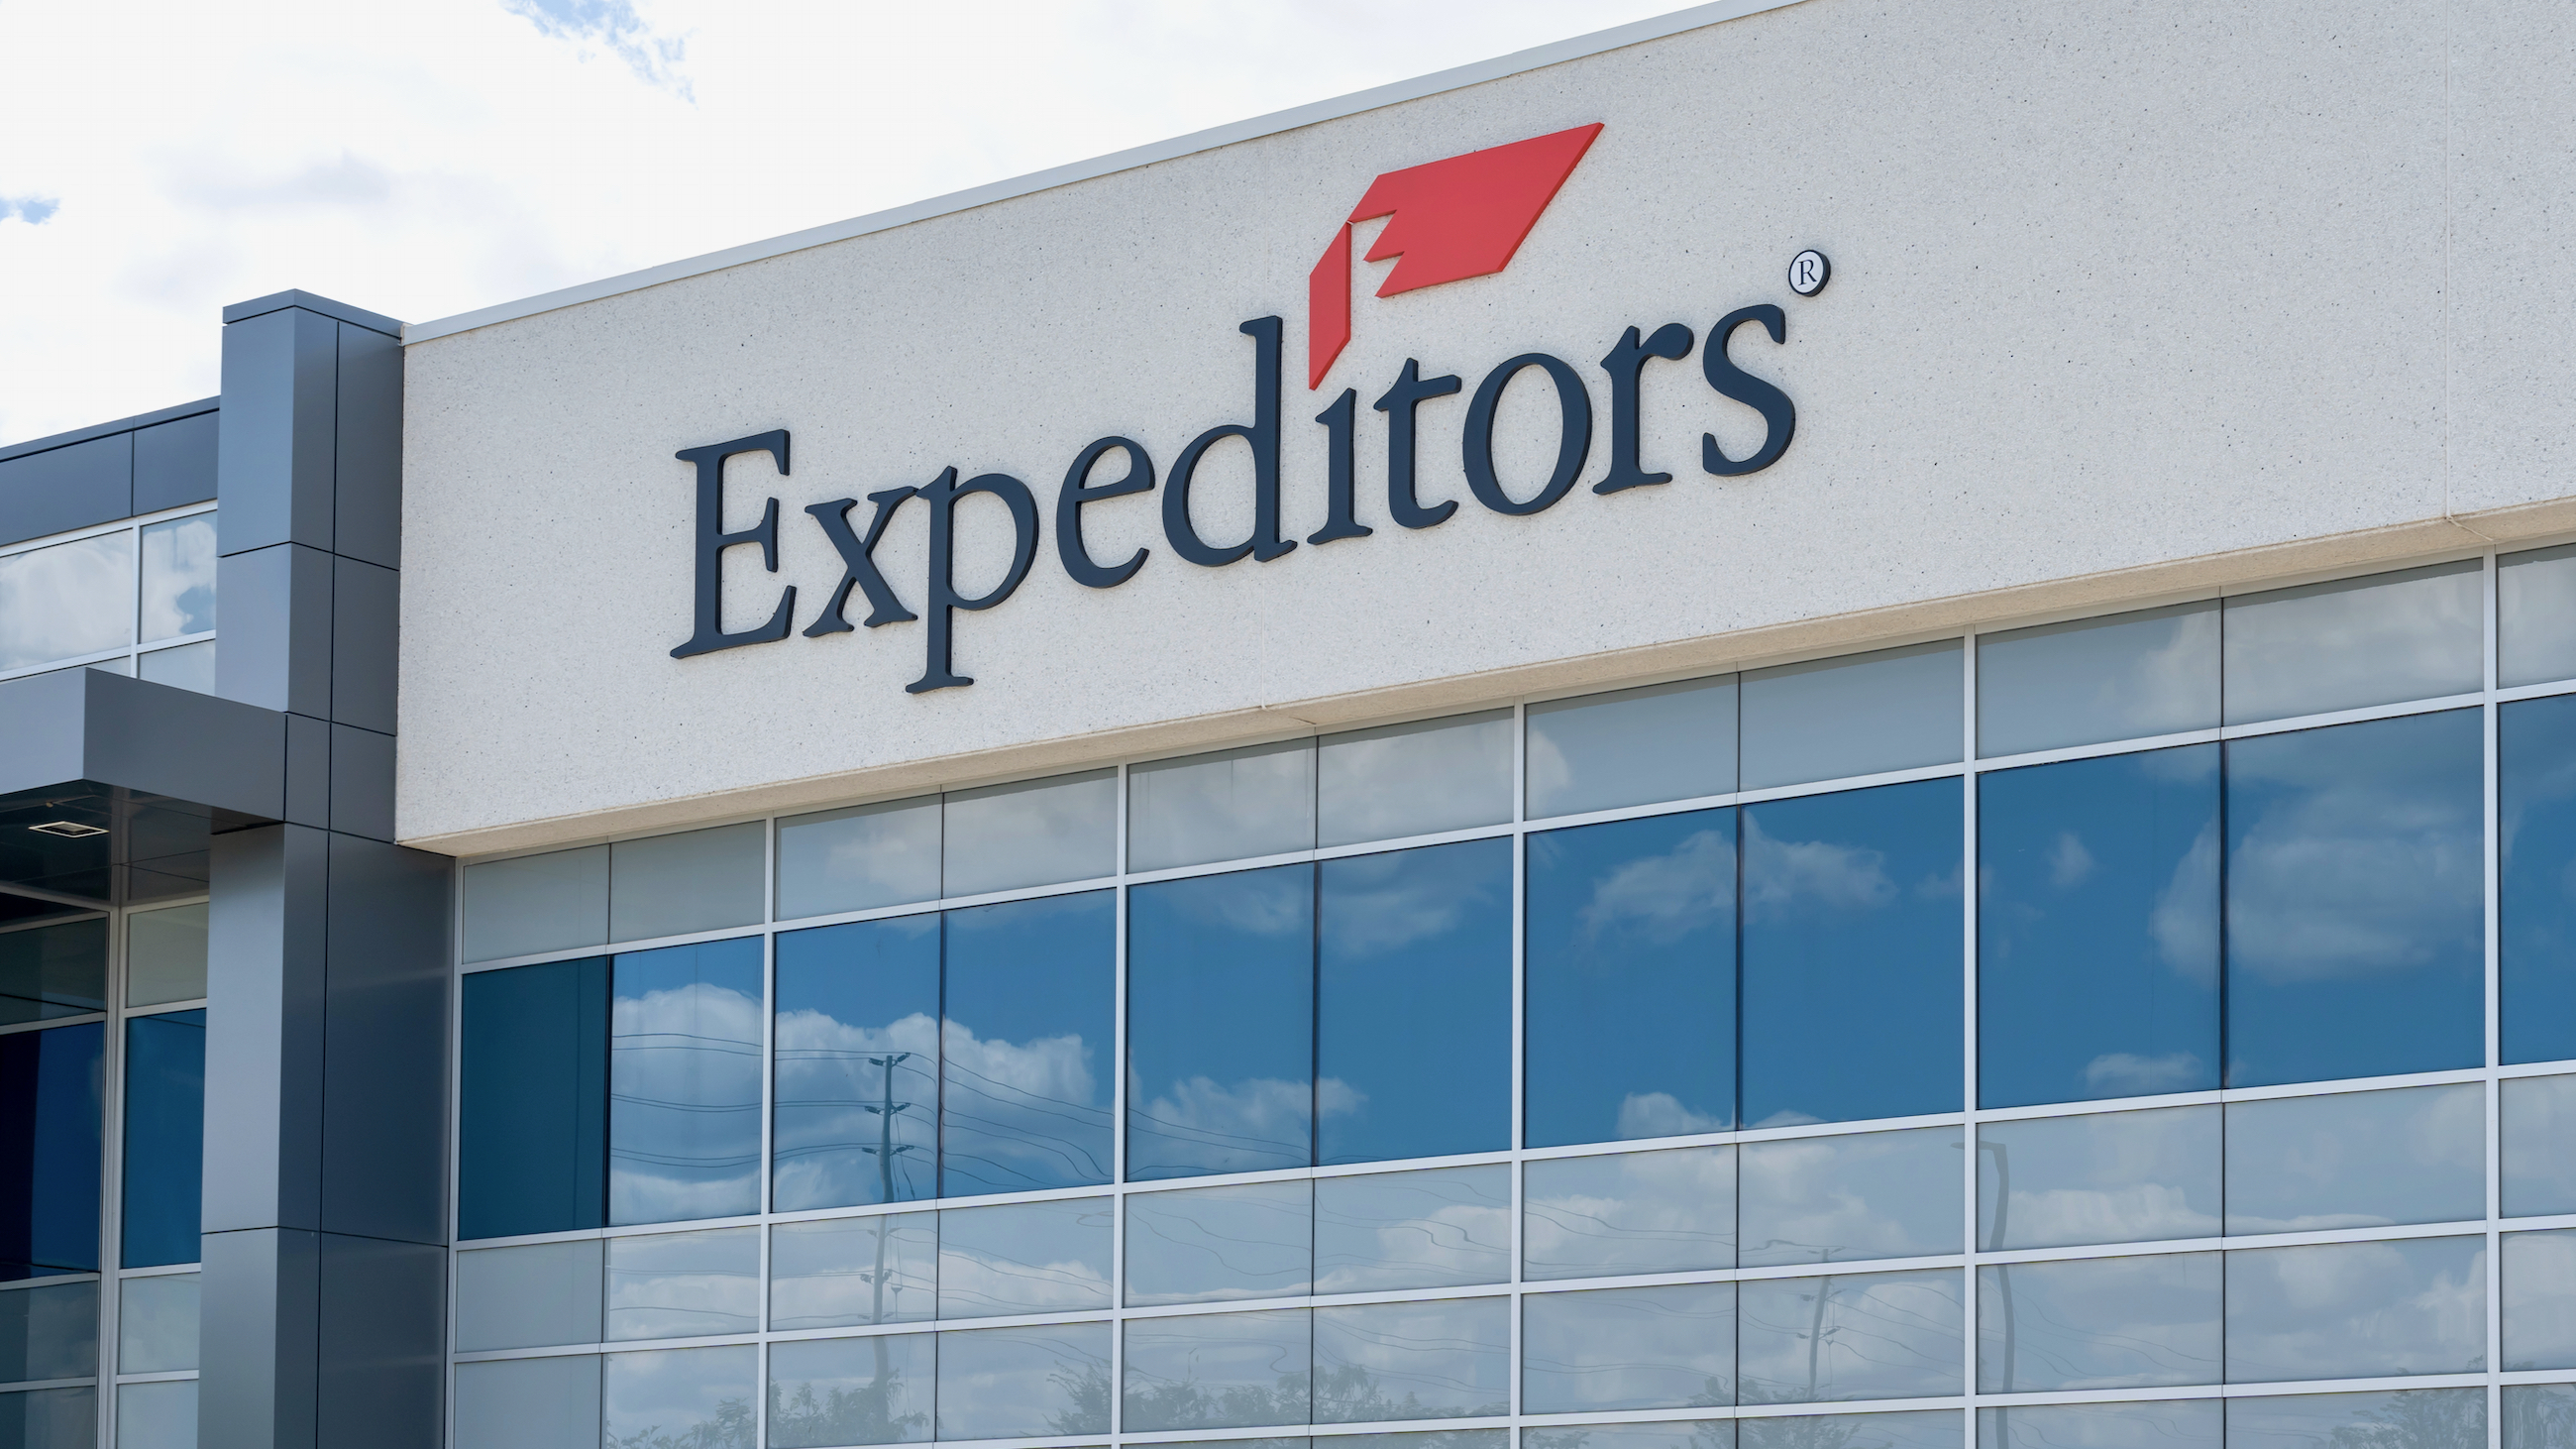 Close up of Expeditors sign on the building on Hogan Dr. in Mississauga, On, Canada. Expeditors is an American logistics and freight forwarding company.